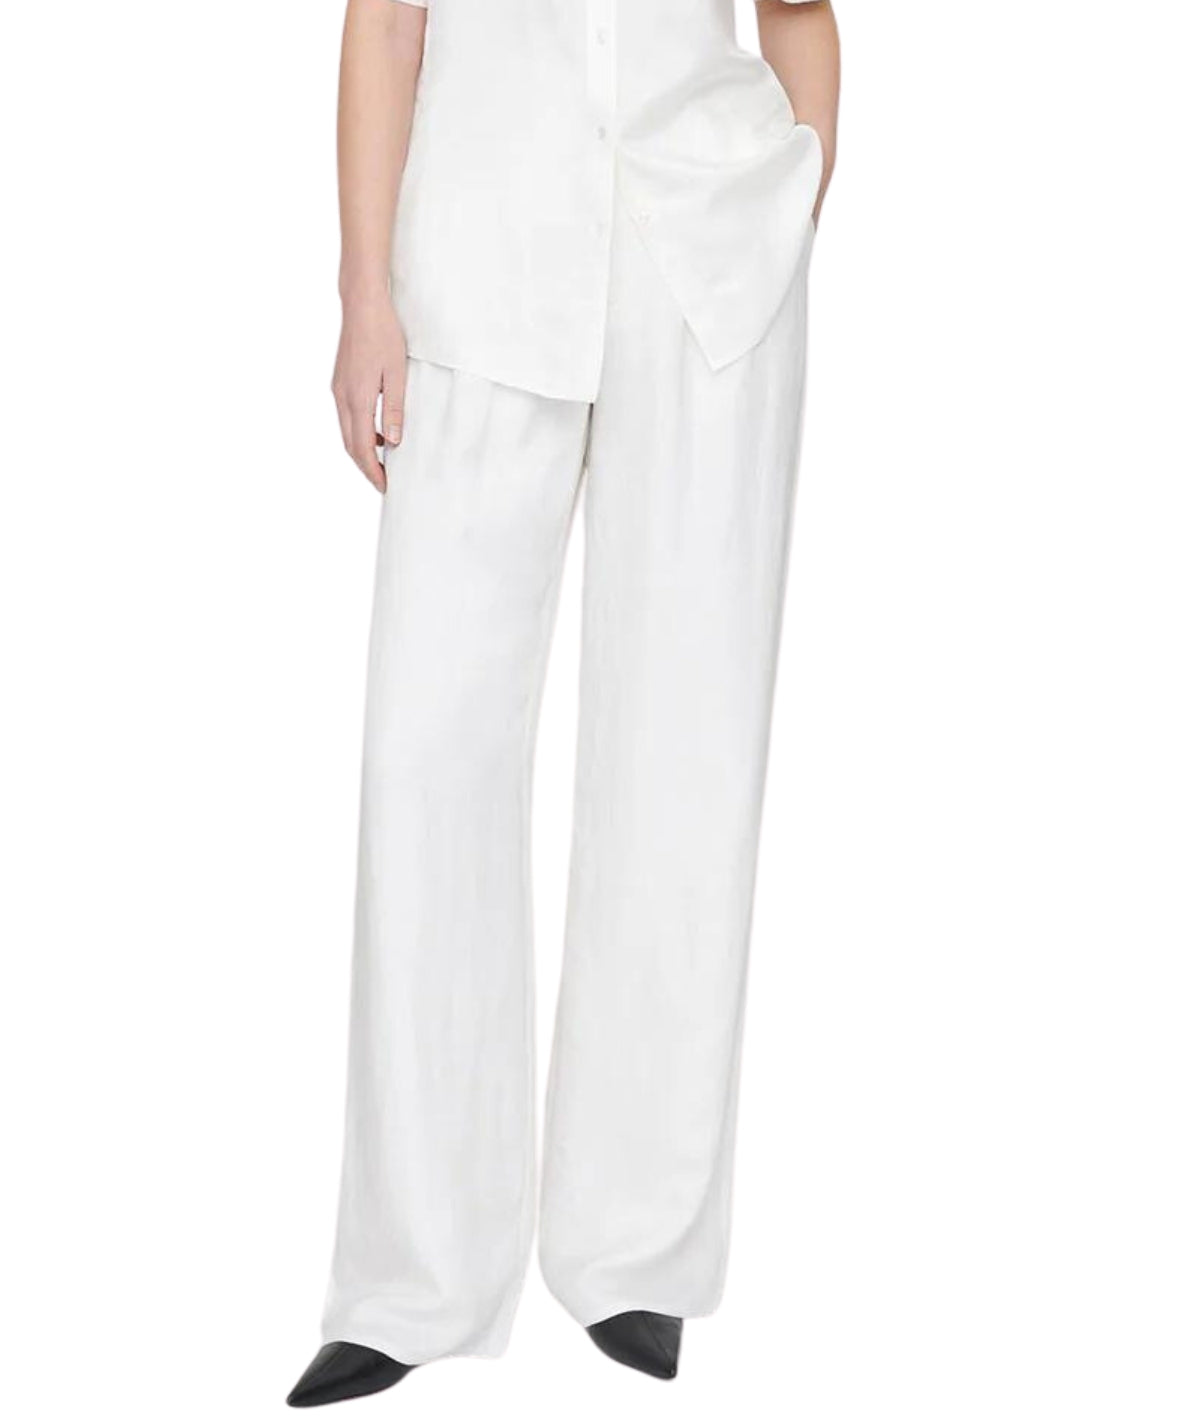 Carrie Pant- White